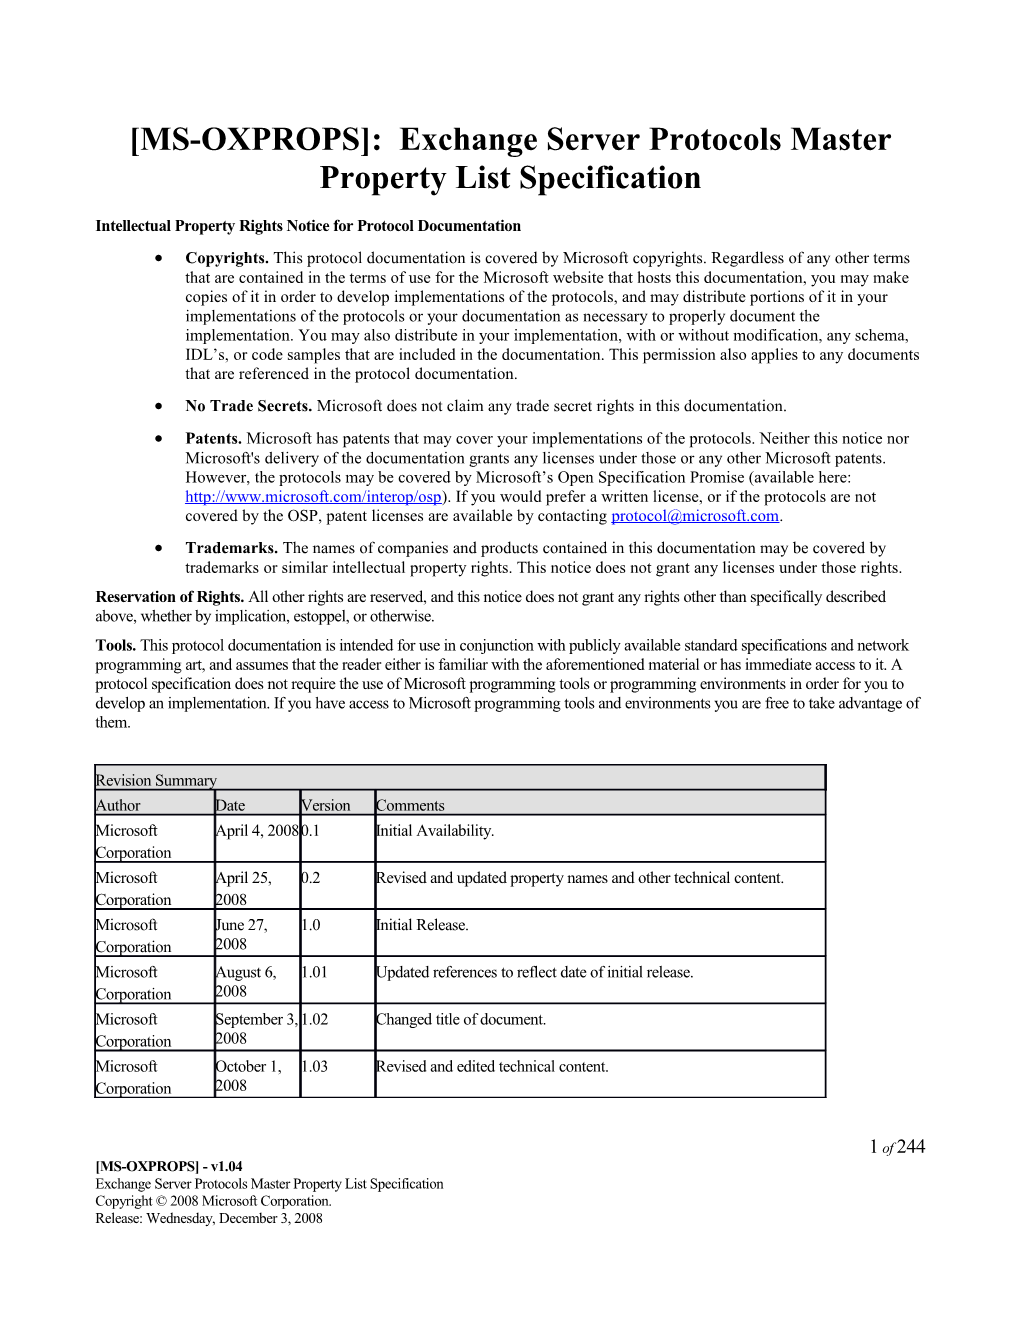 MS-OXPROPS : Exchange Server Protocols Master Property List Specification